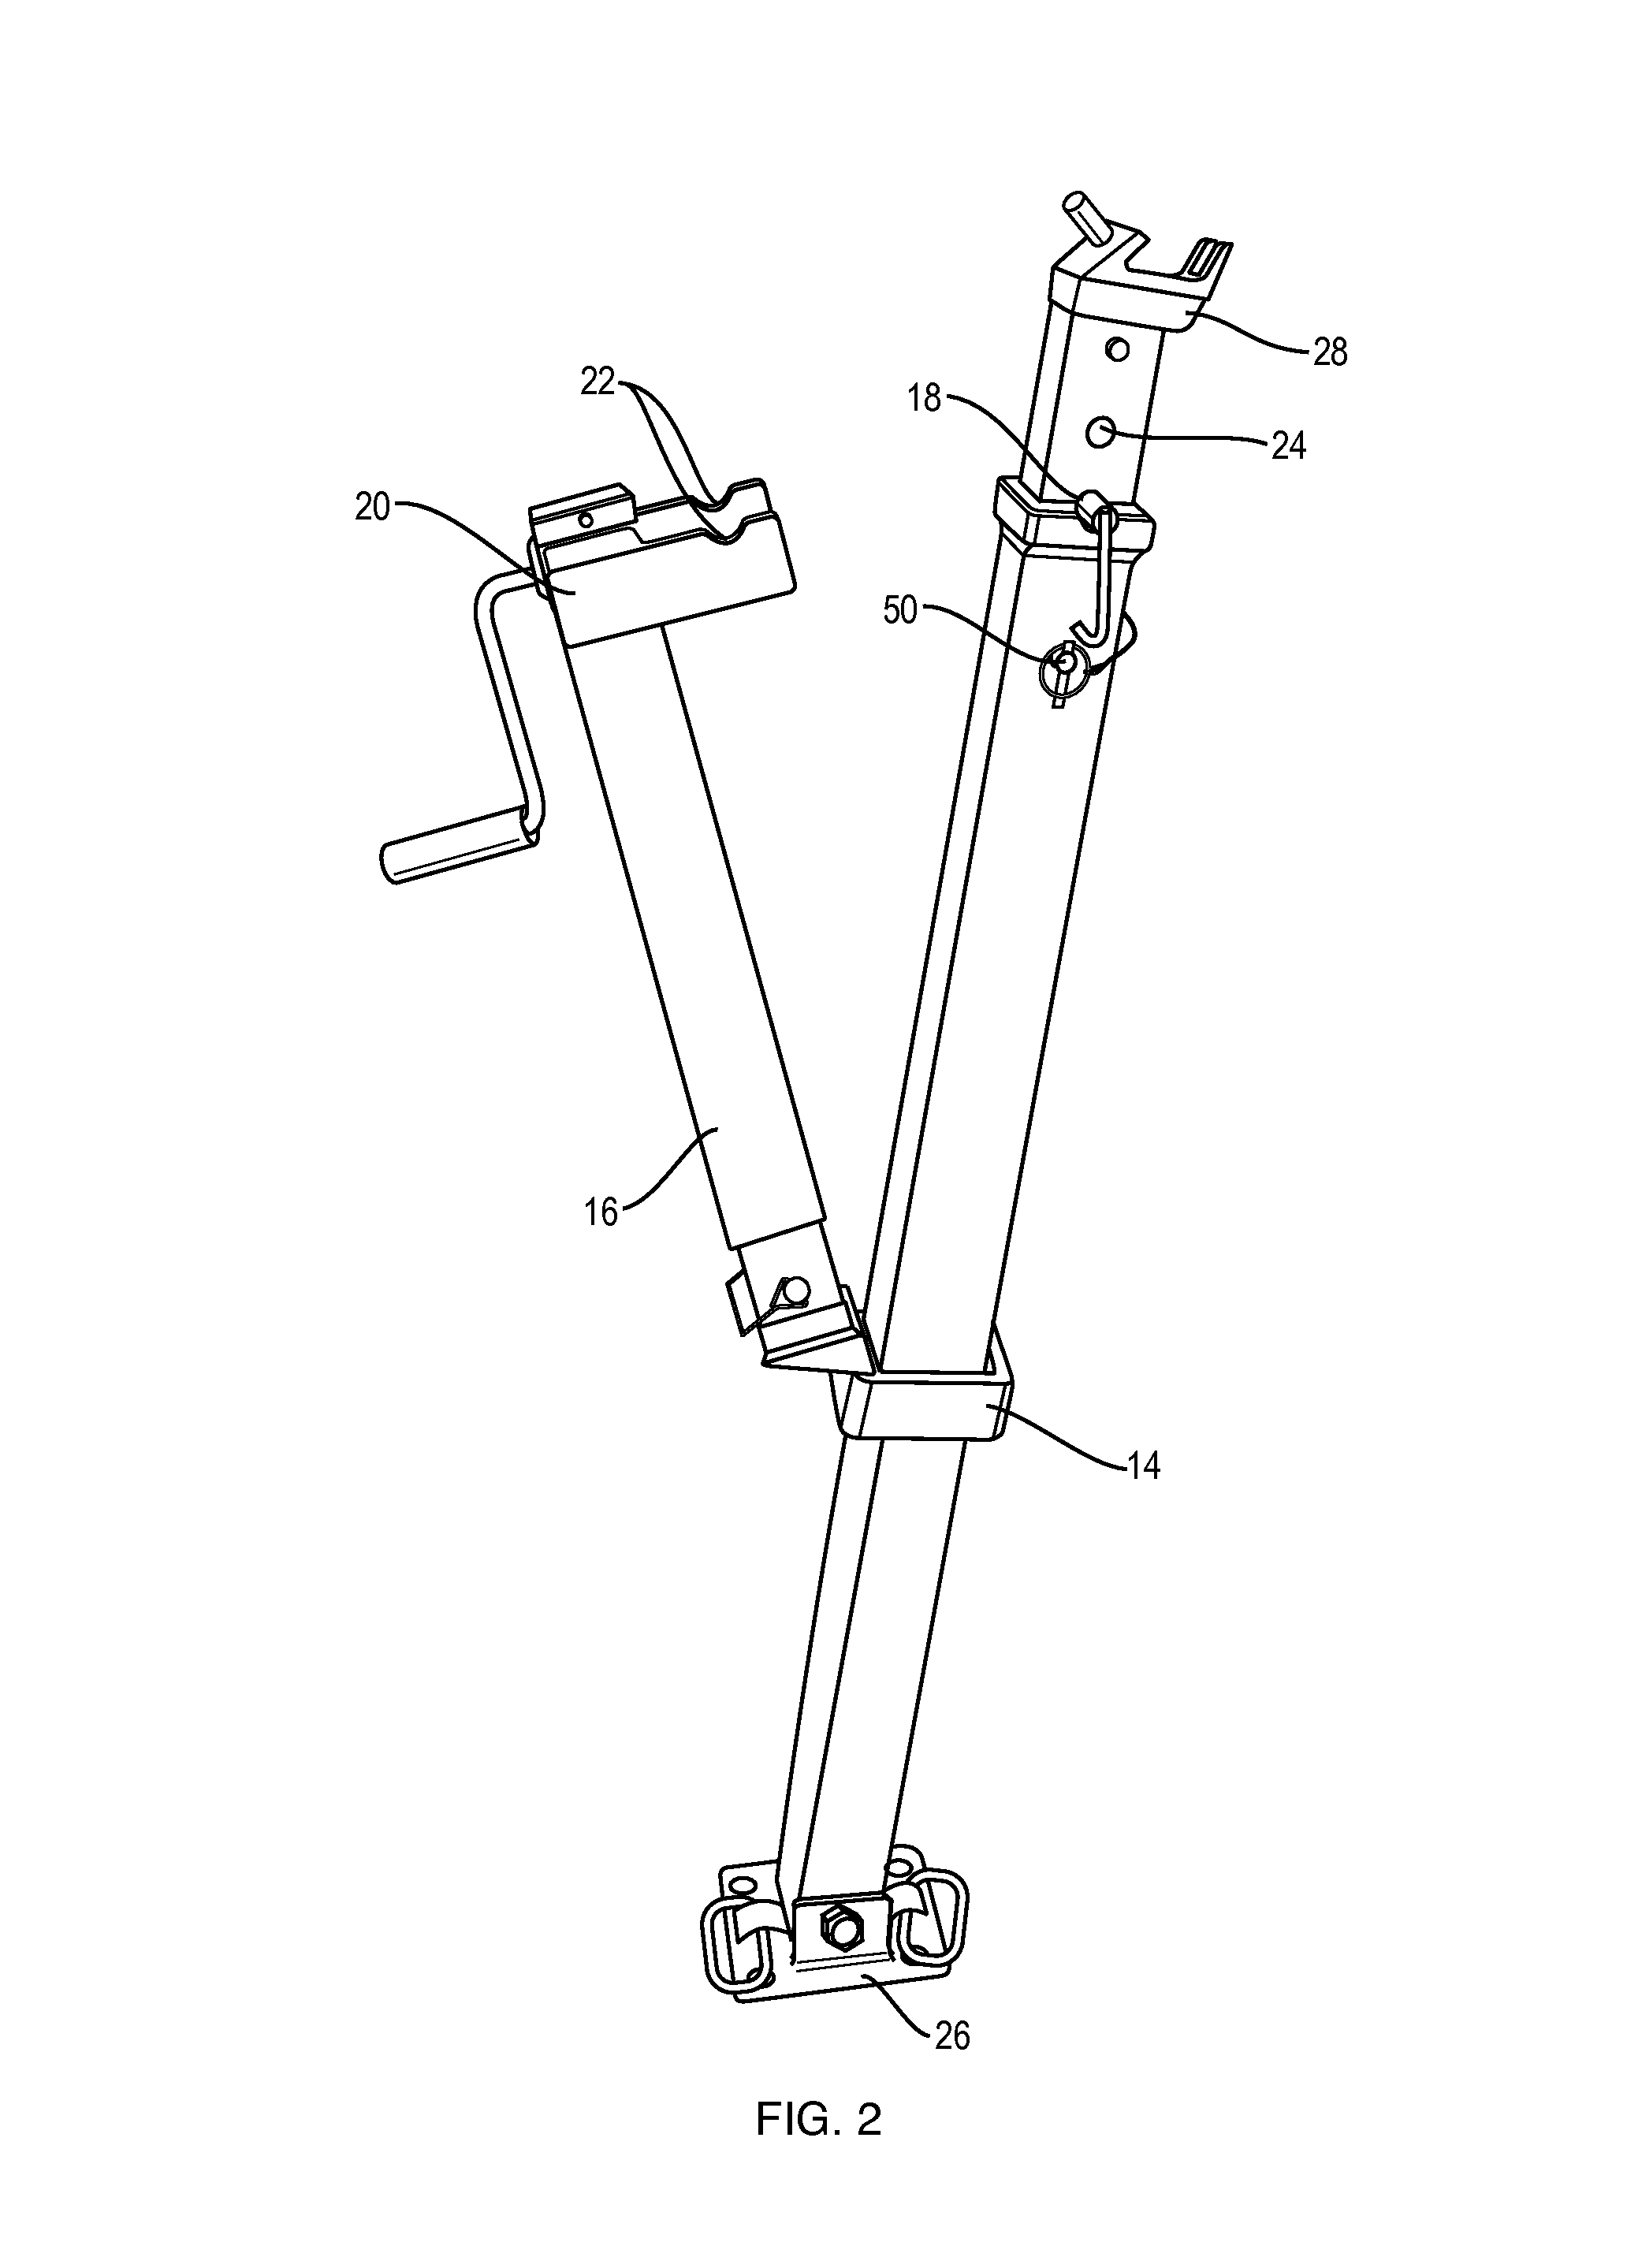 Adjustable lifting and stabilization rescue strut system with improved jack and strut engagement means